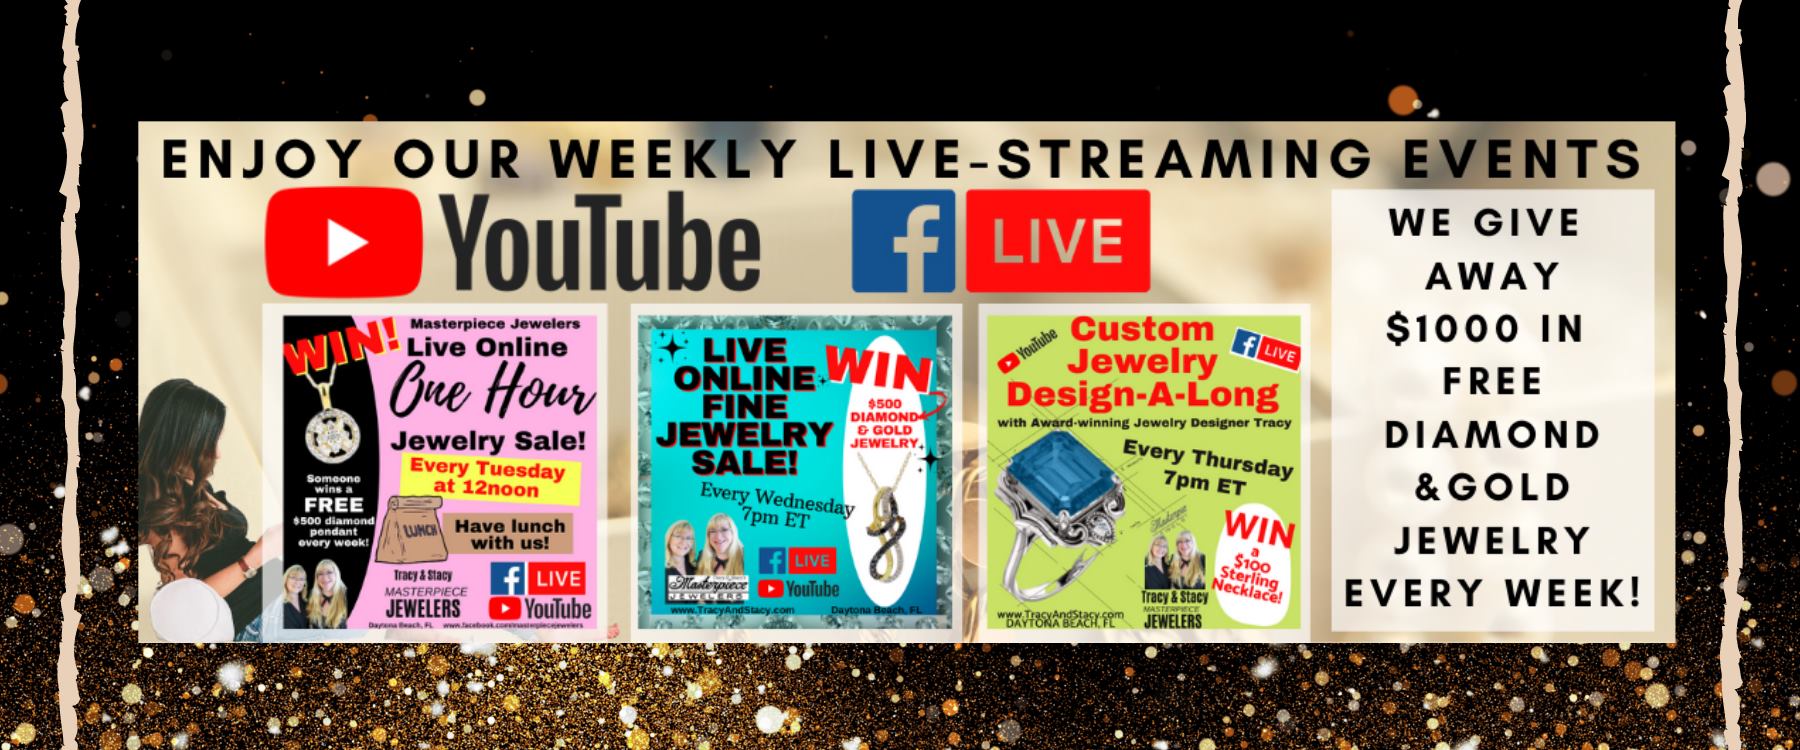 Your custom jewelers in Florida have weekly jewelry giveaways!!